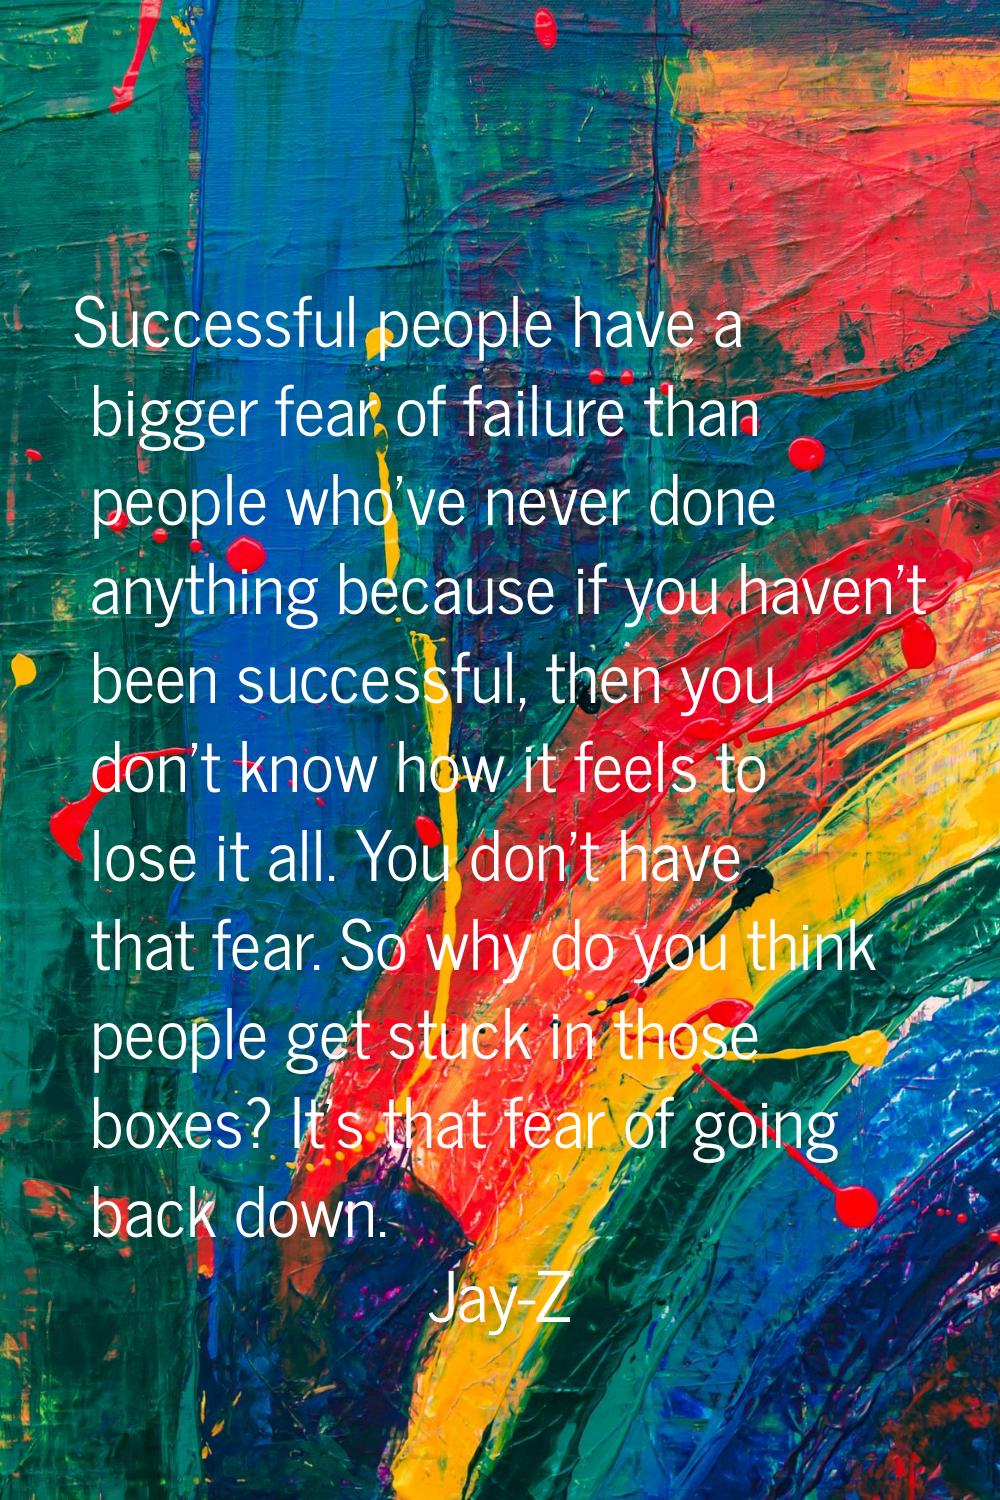 Successful people have a bigger fear of failure than people who've never done anything because if y